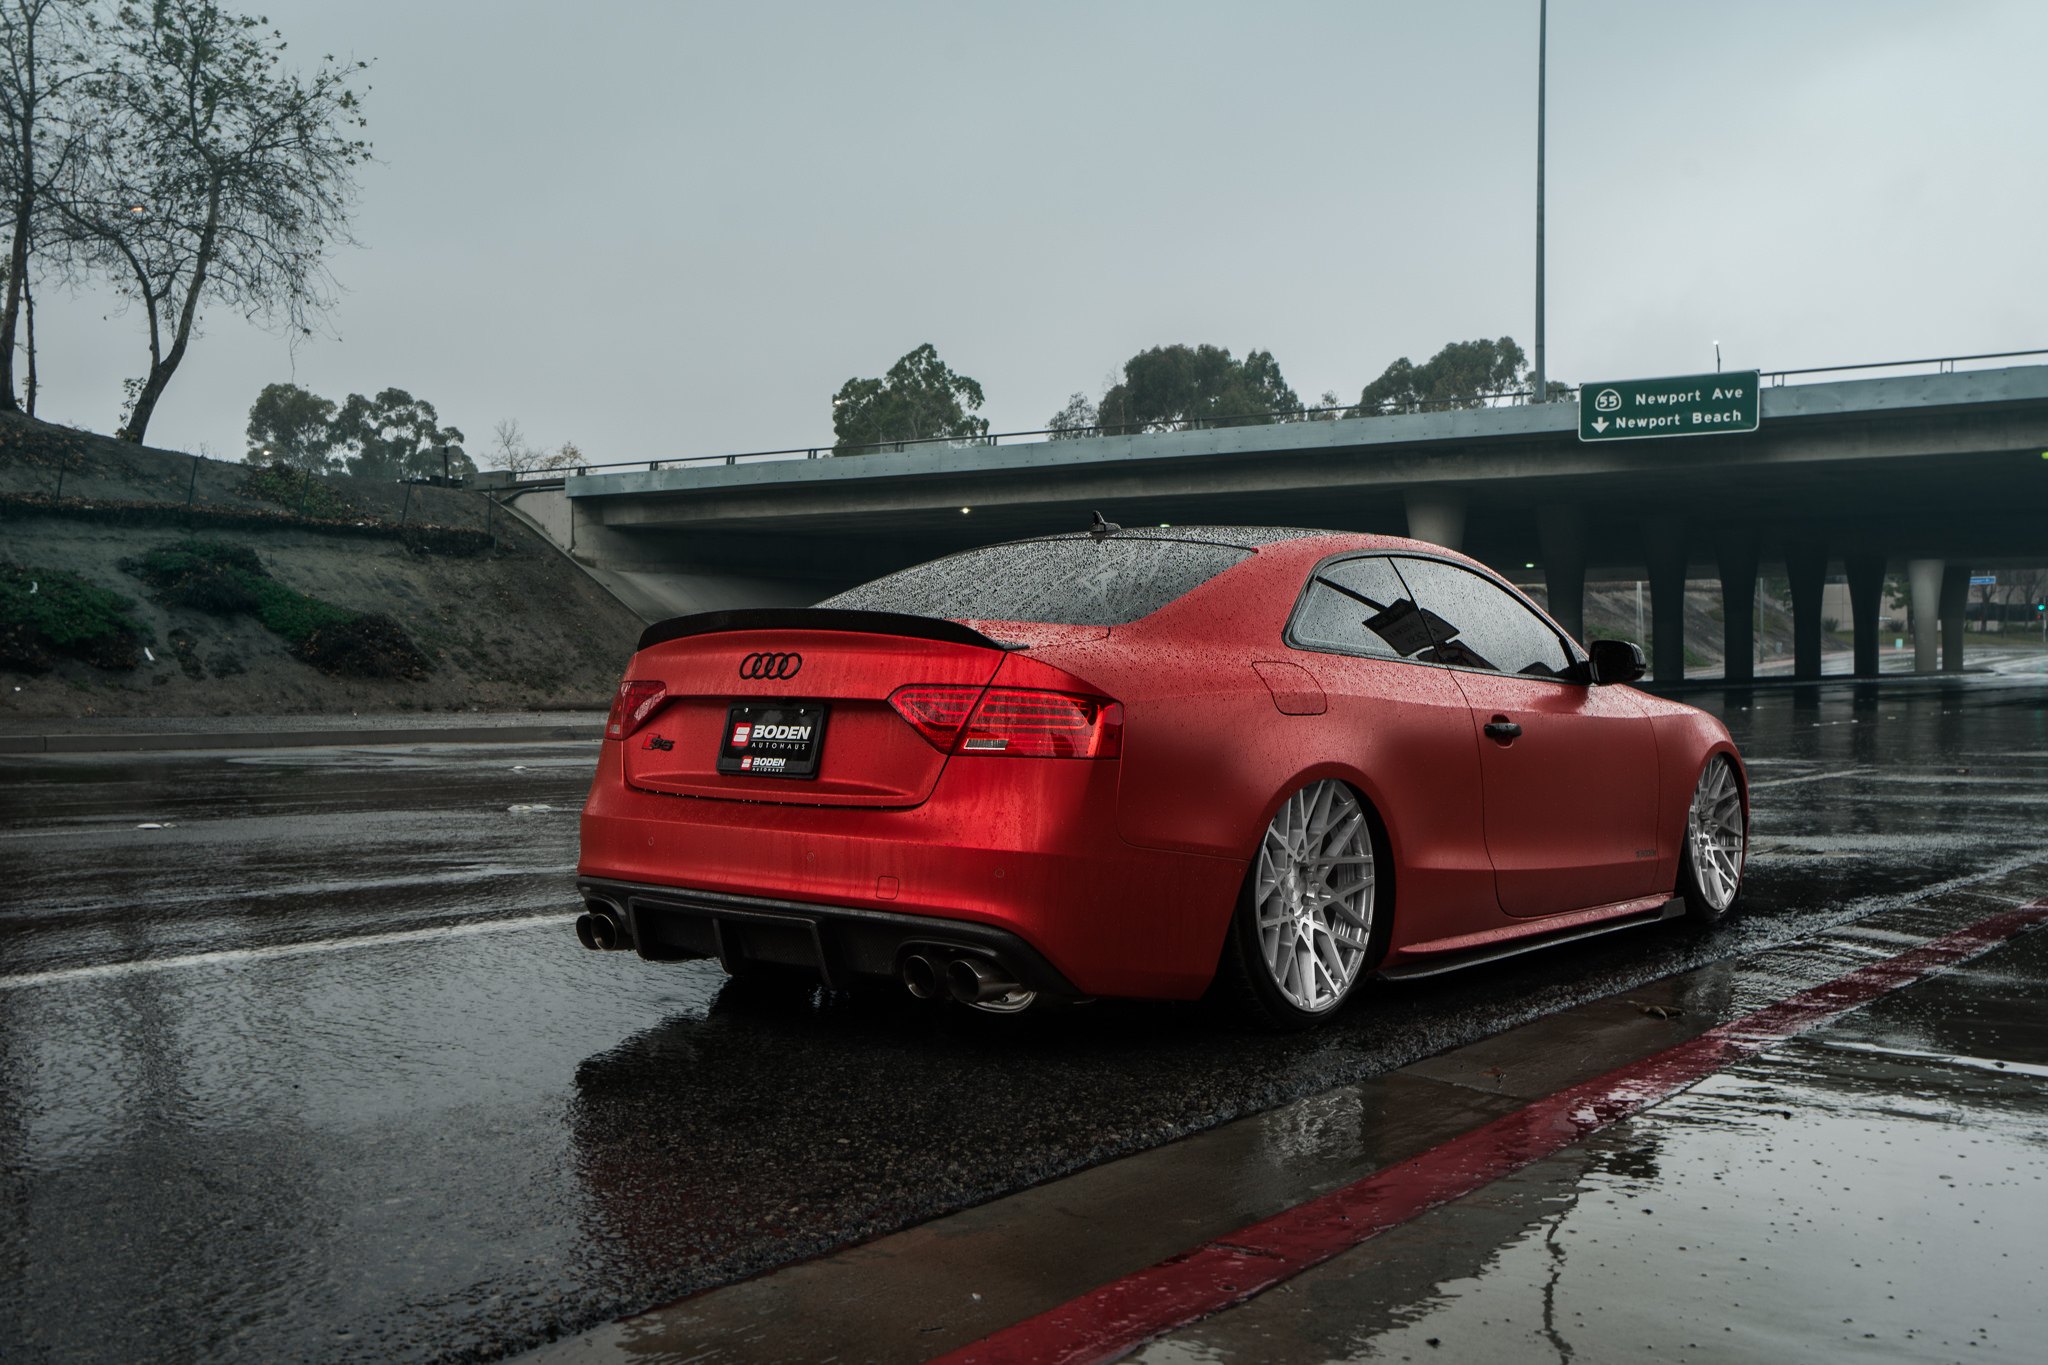 Custom Rear Lip Spoiler on Red Audi S5 - Photo by Boden Autohaus